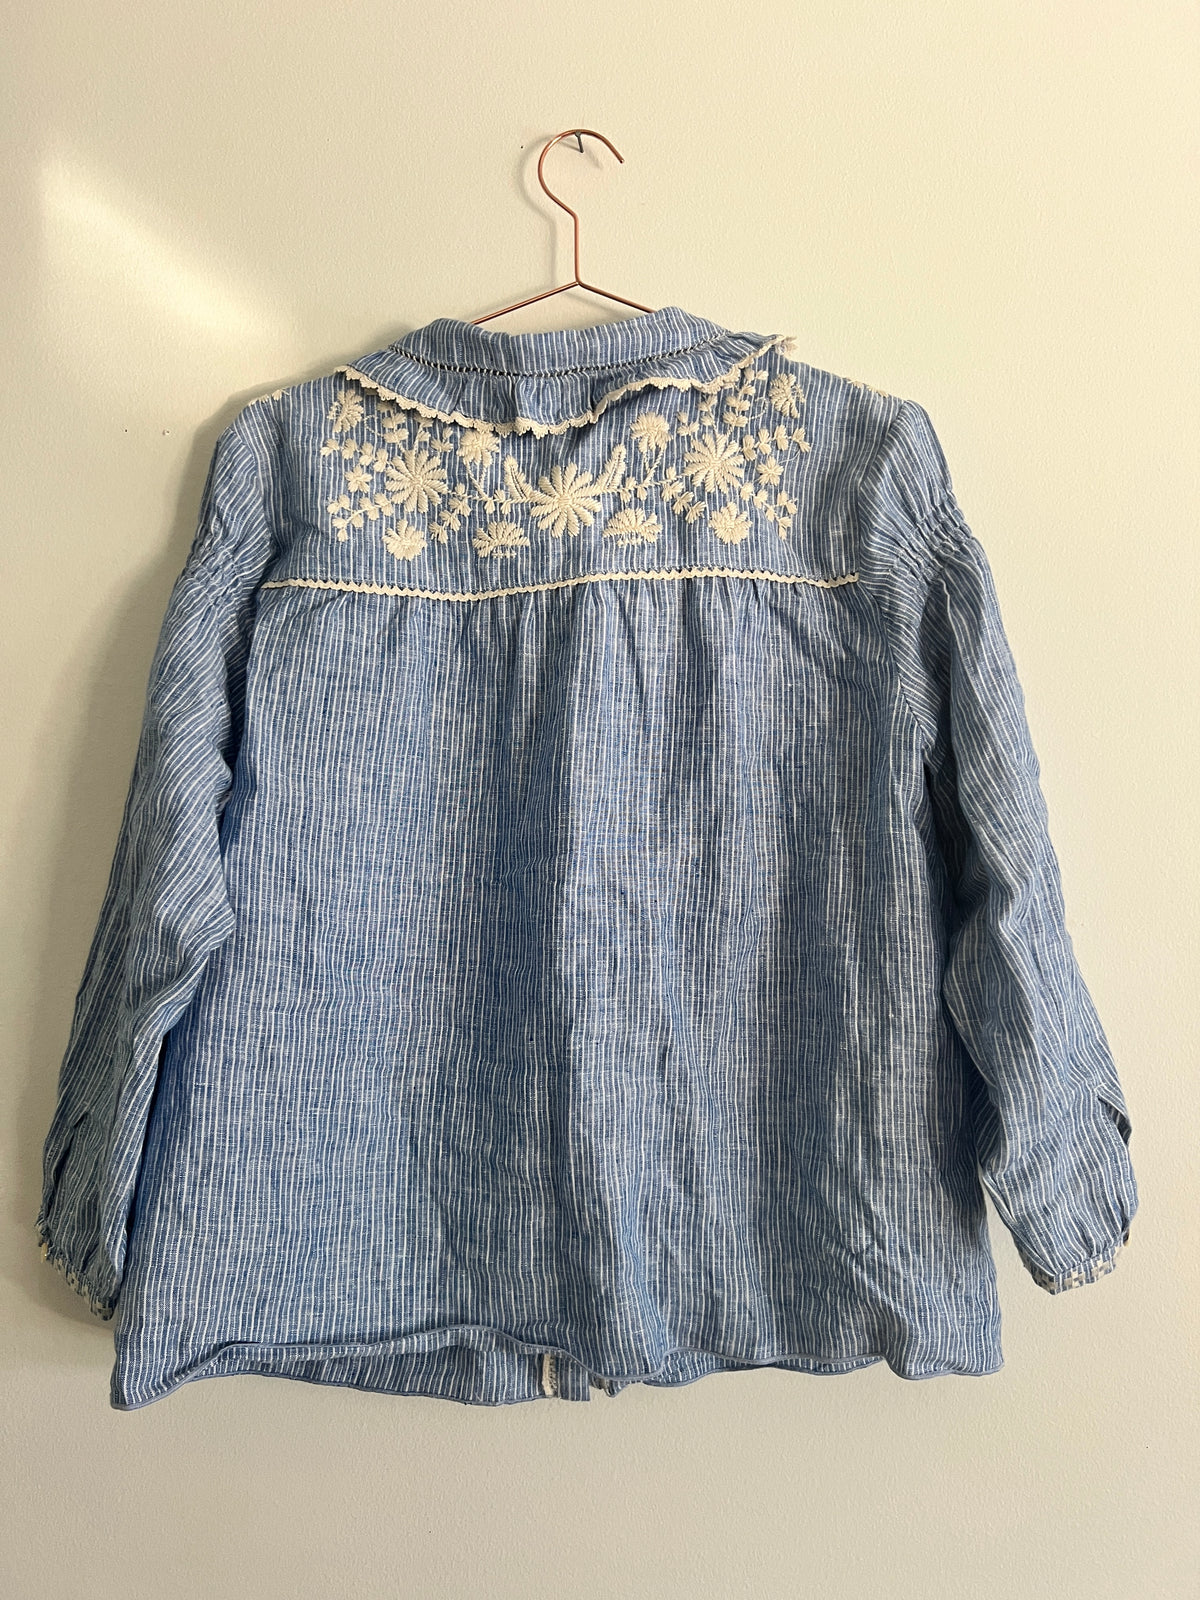 Louis Louise Embriodered Blue Striped Blouse Preloved